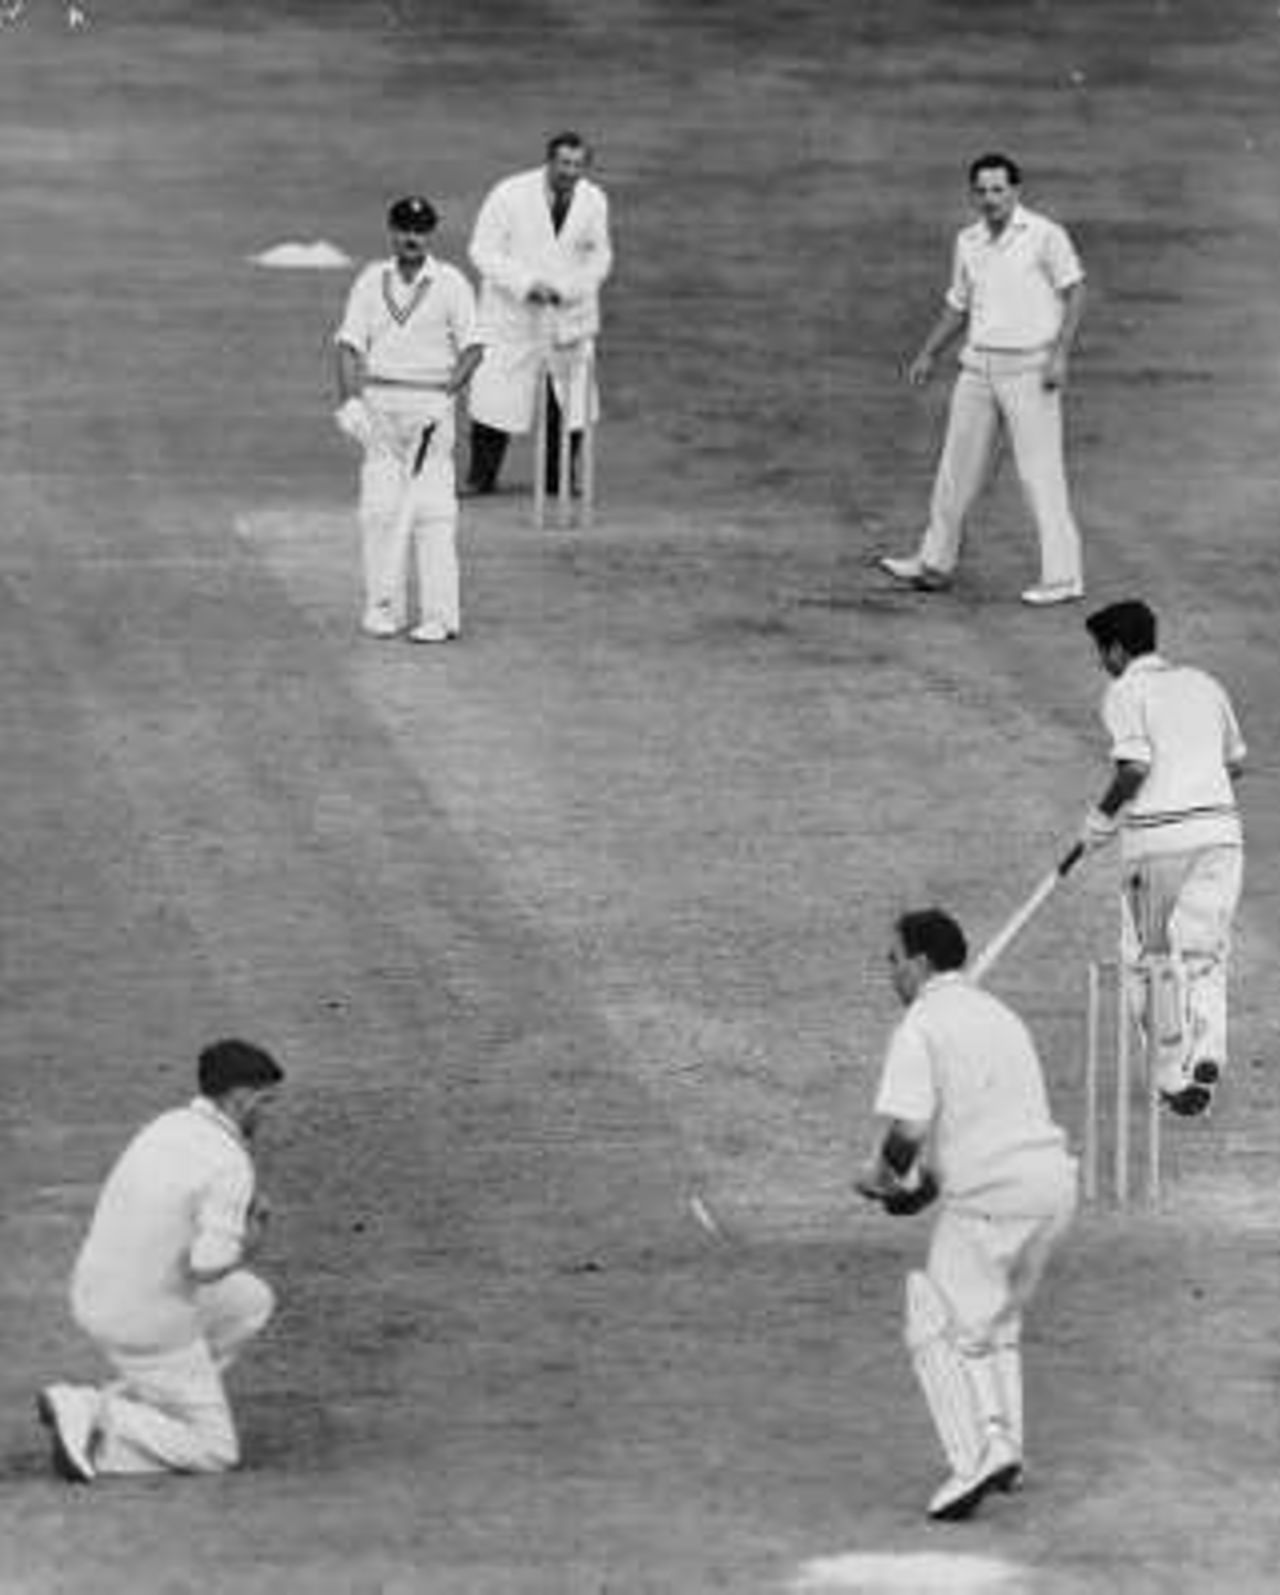 Don Shepherd claims another wicket during Glamorgan`s match with the 1959 Indians